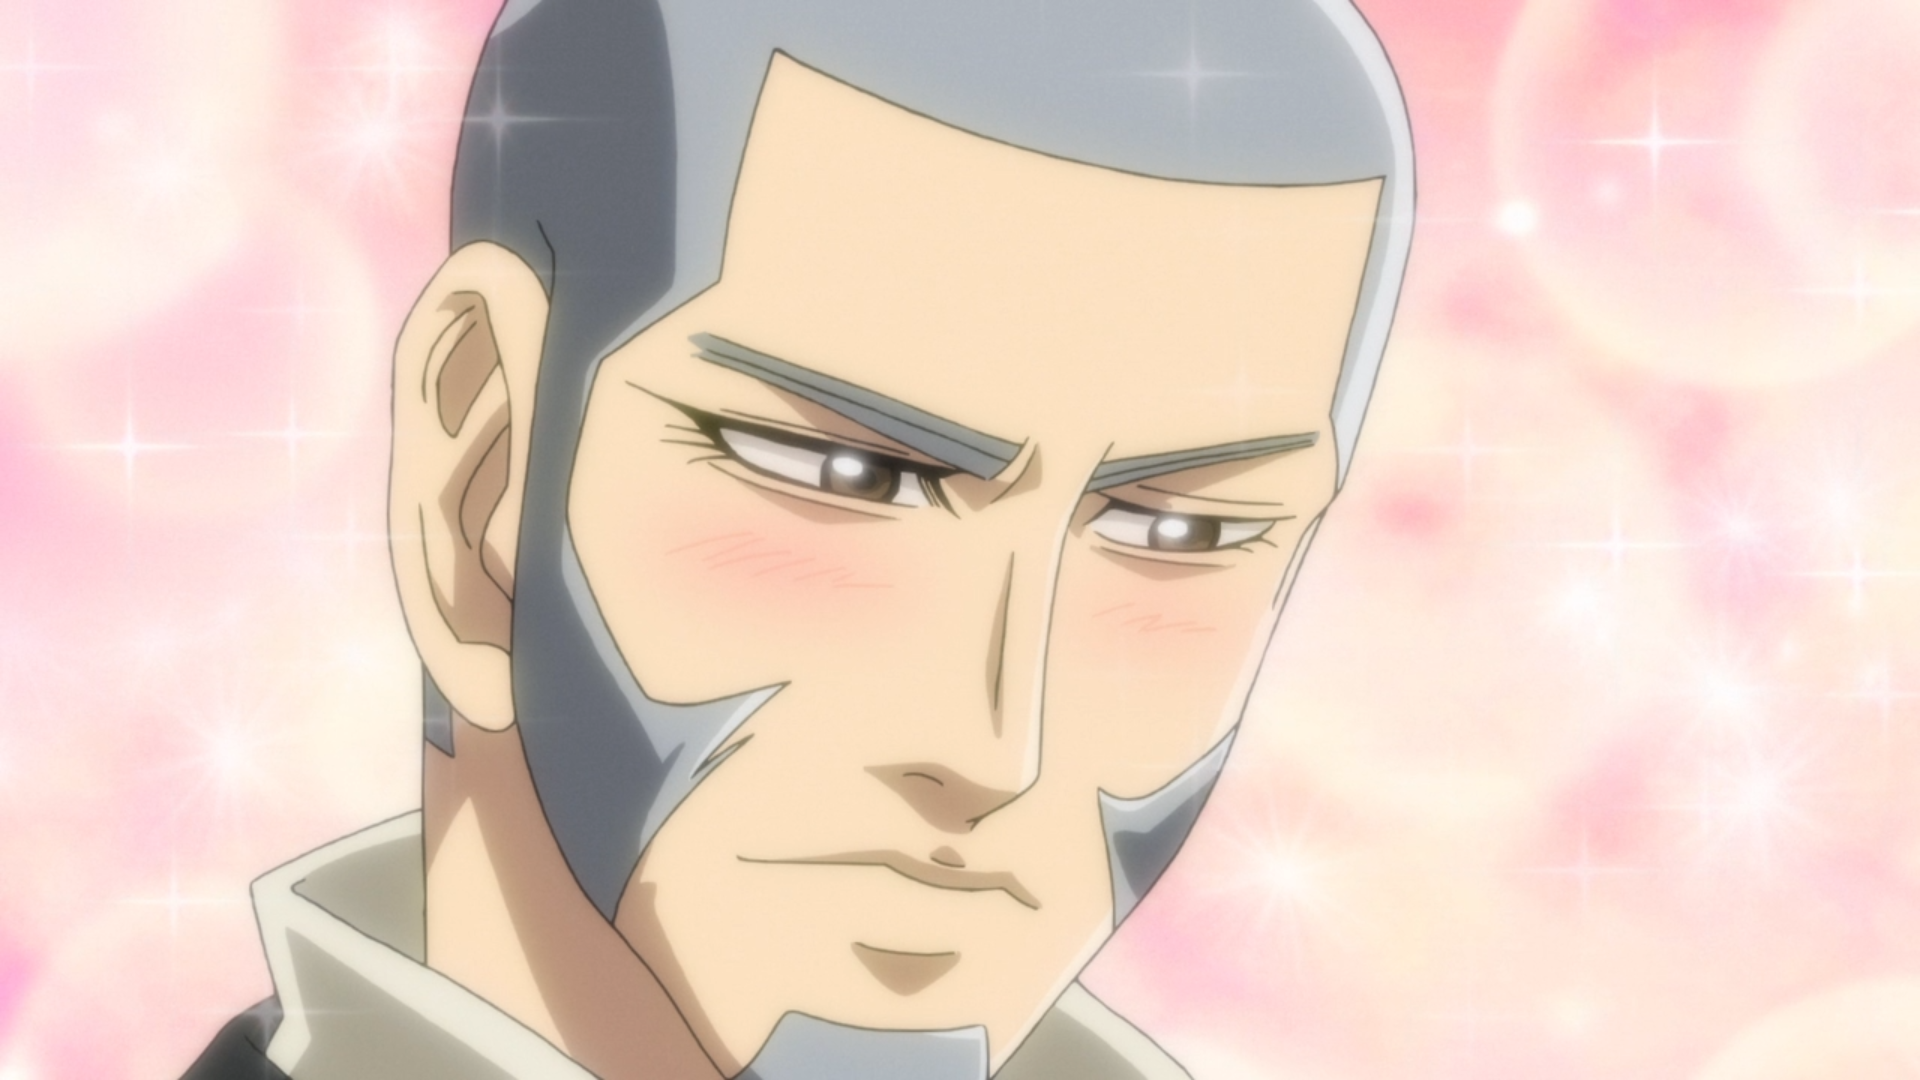 Shiraishi appears unfathomably sexy to Sugimoto's otter-altered perceptions in a scene from Episode 20 of the Golden Kamuy TV anime.